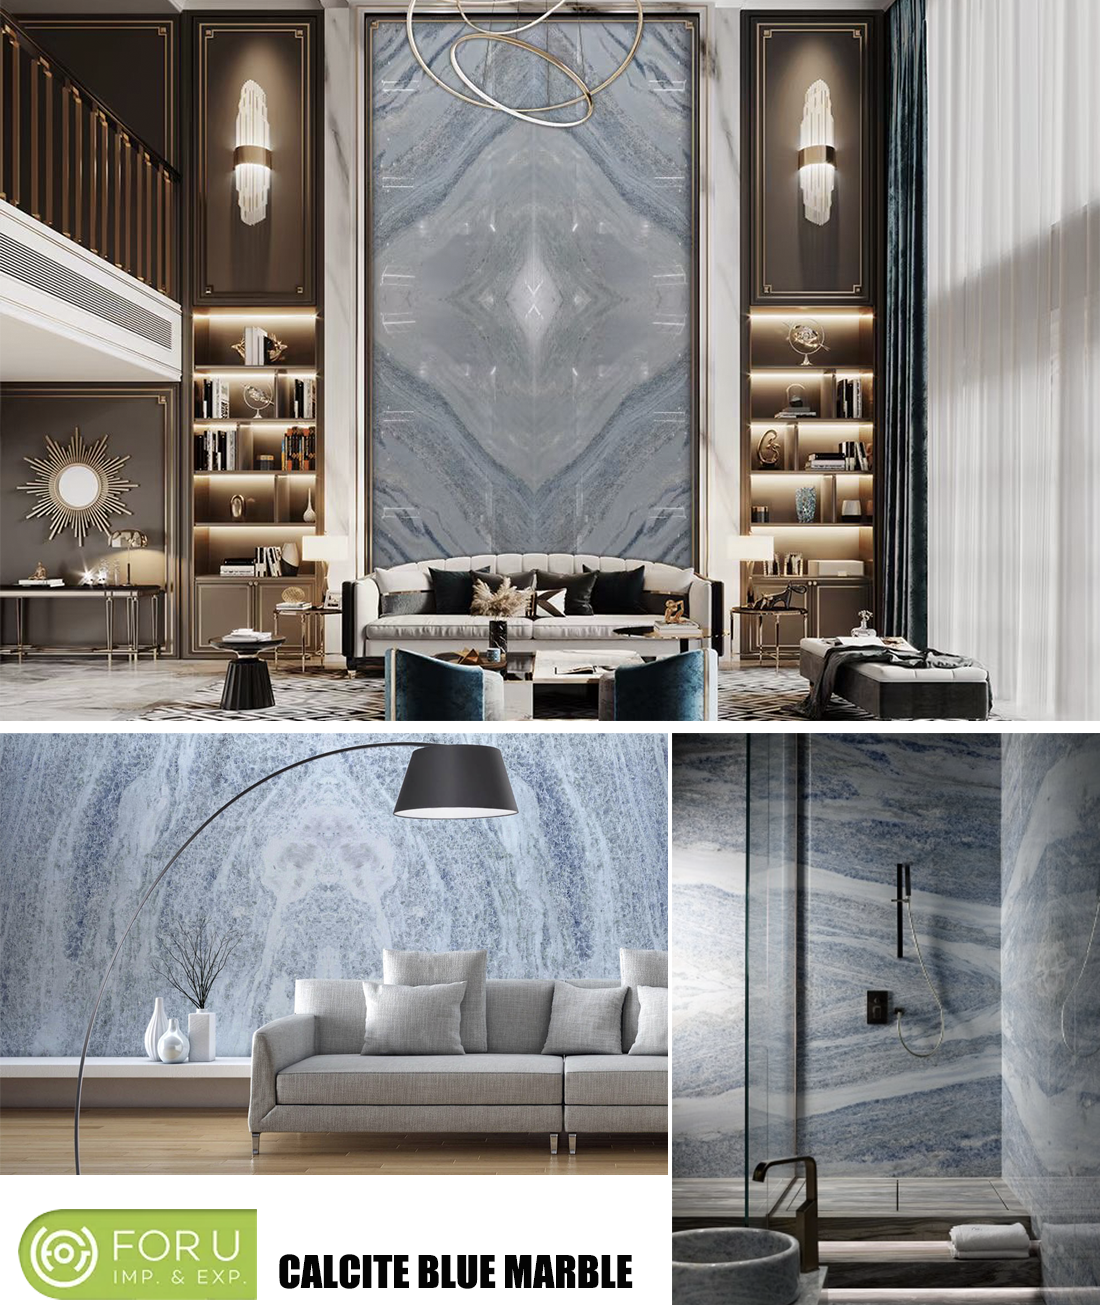 Calcite Blue Marble Wall Projects FOR U STONE